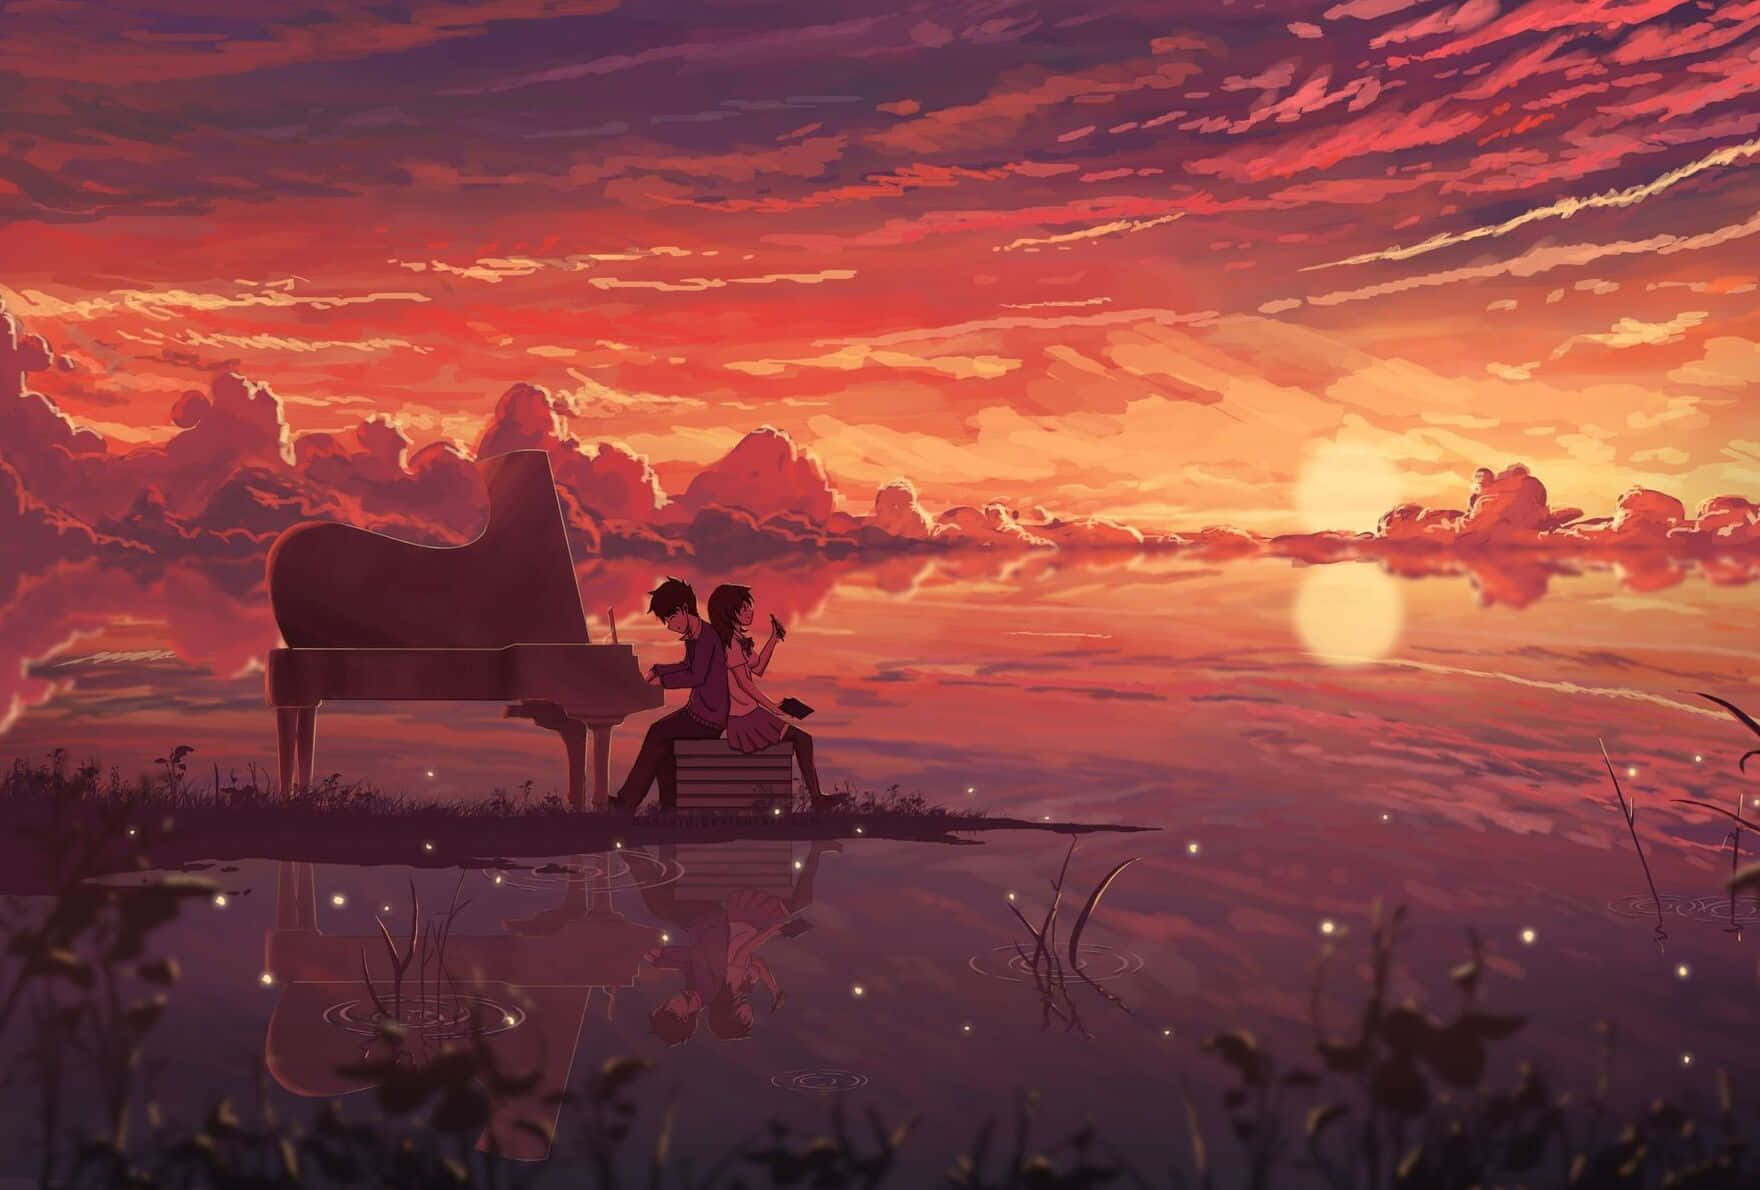 Looking for nostalgia? Dive into these beautiful Anime Art scenes.